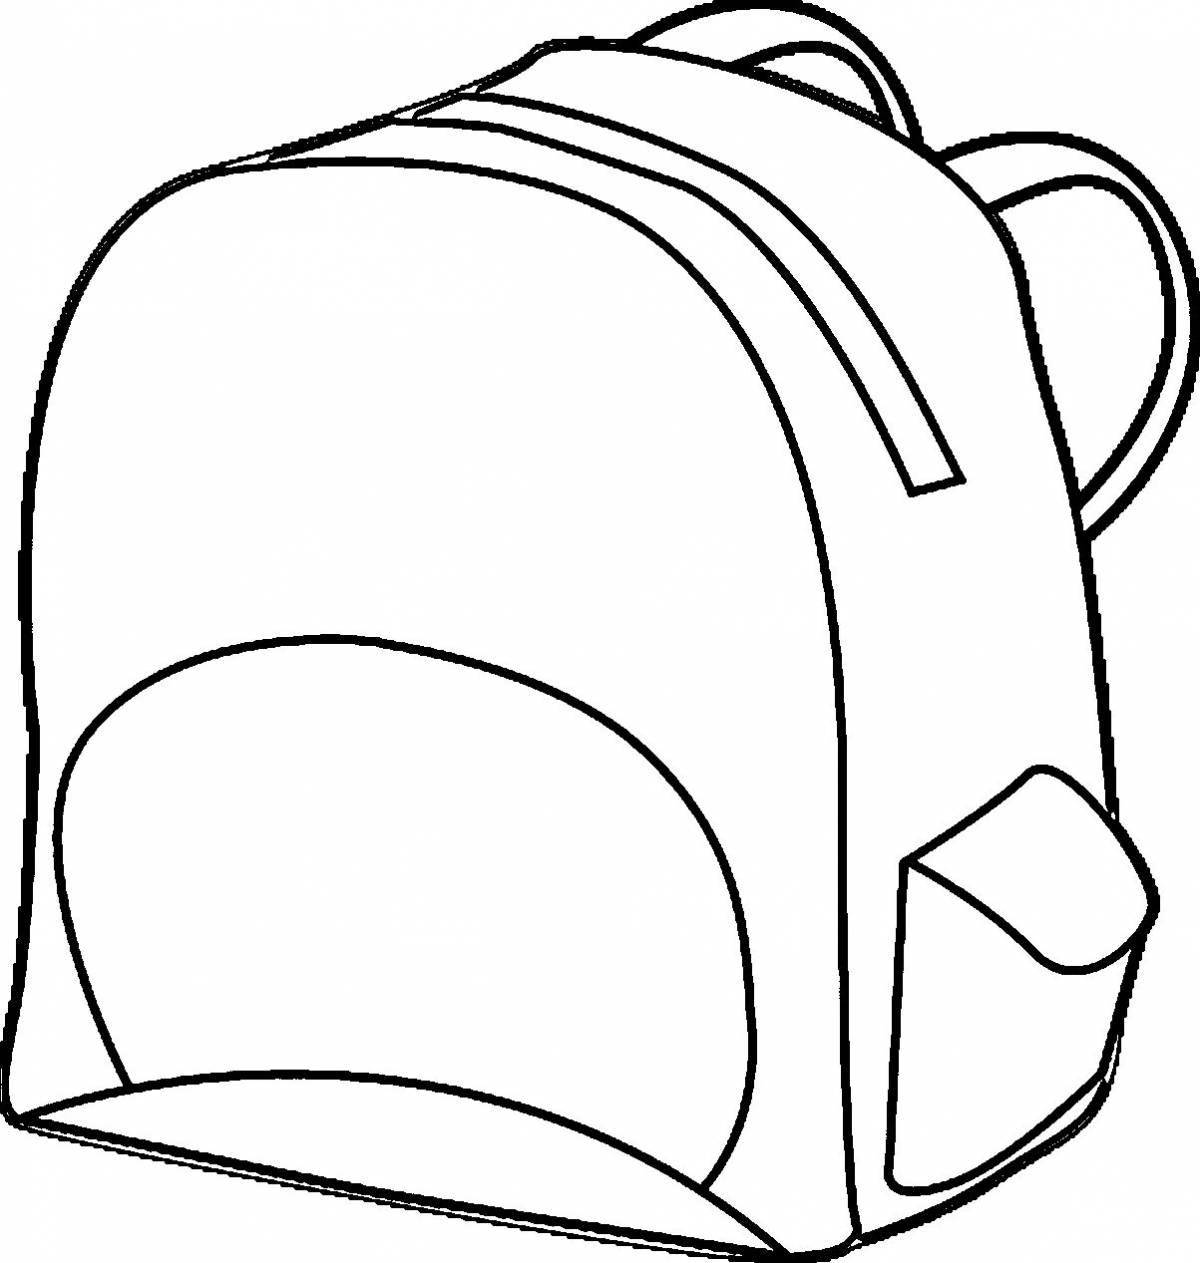 Colored backpack coloring book for kids